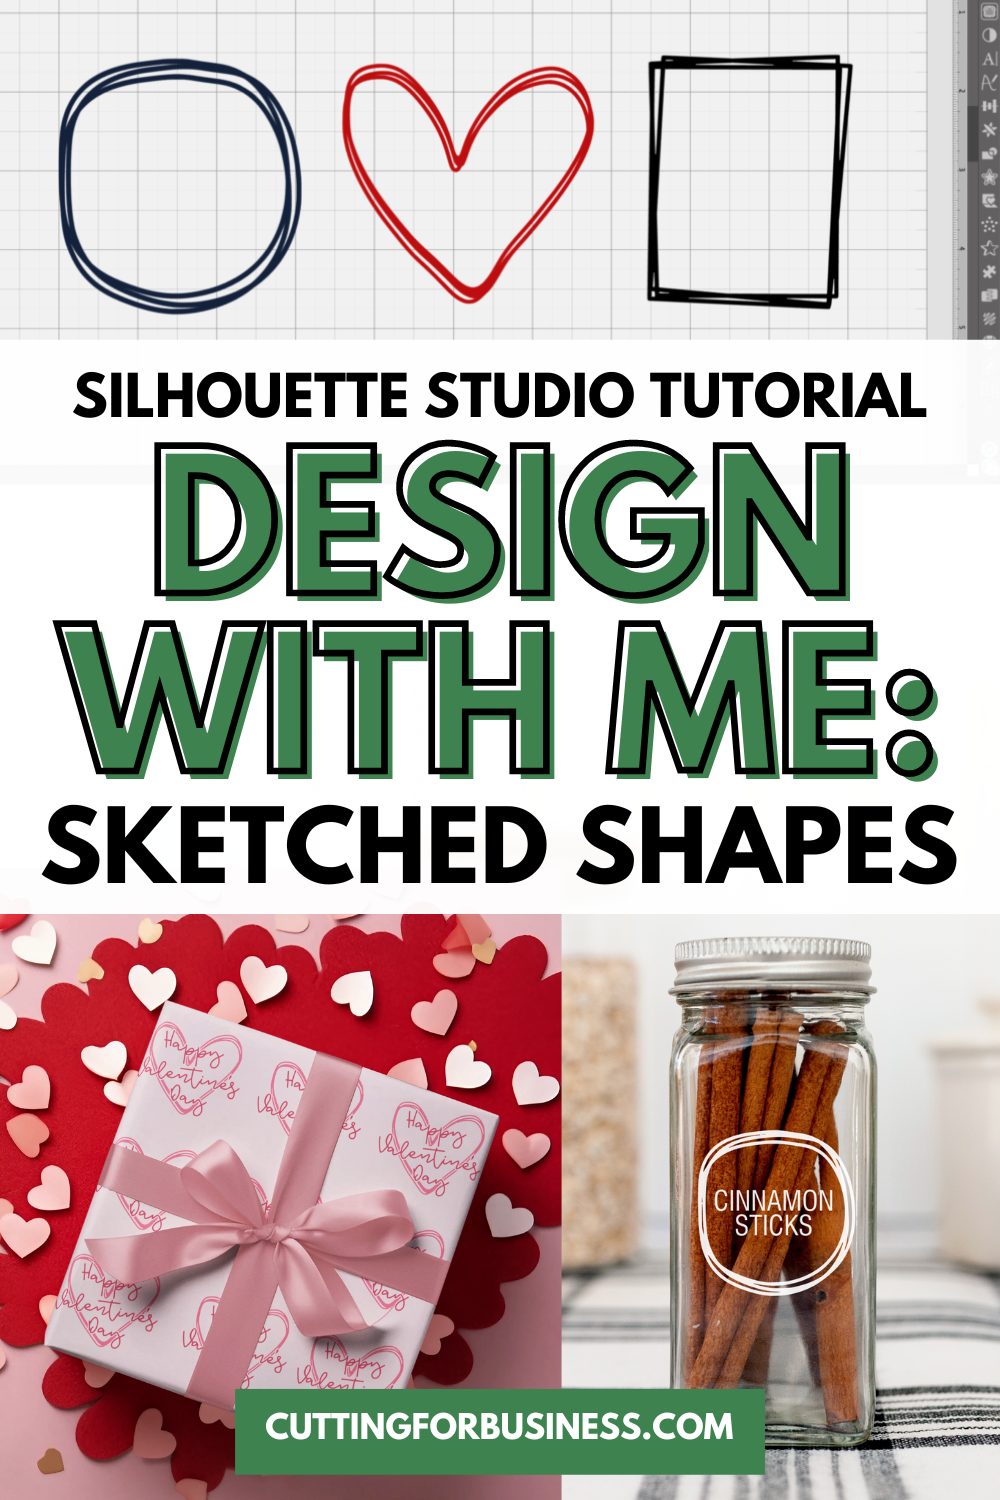 Silhouette Studio Tutorial: How to a Create Sketched Shape SVG - cuttingforbusiness.com